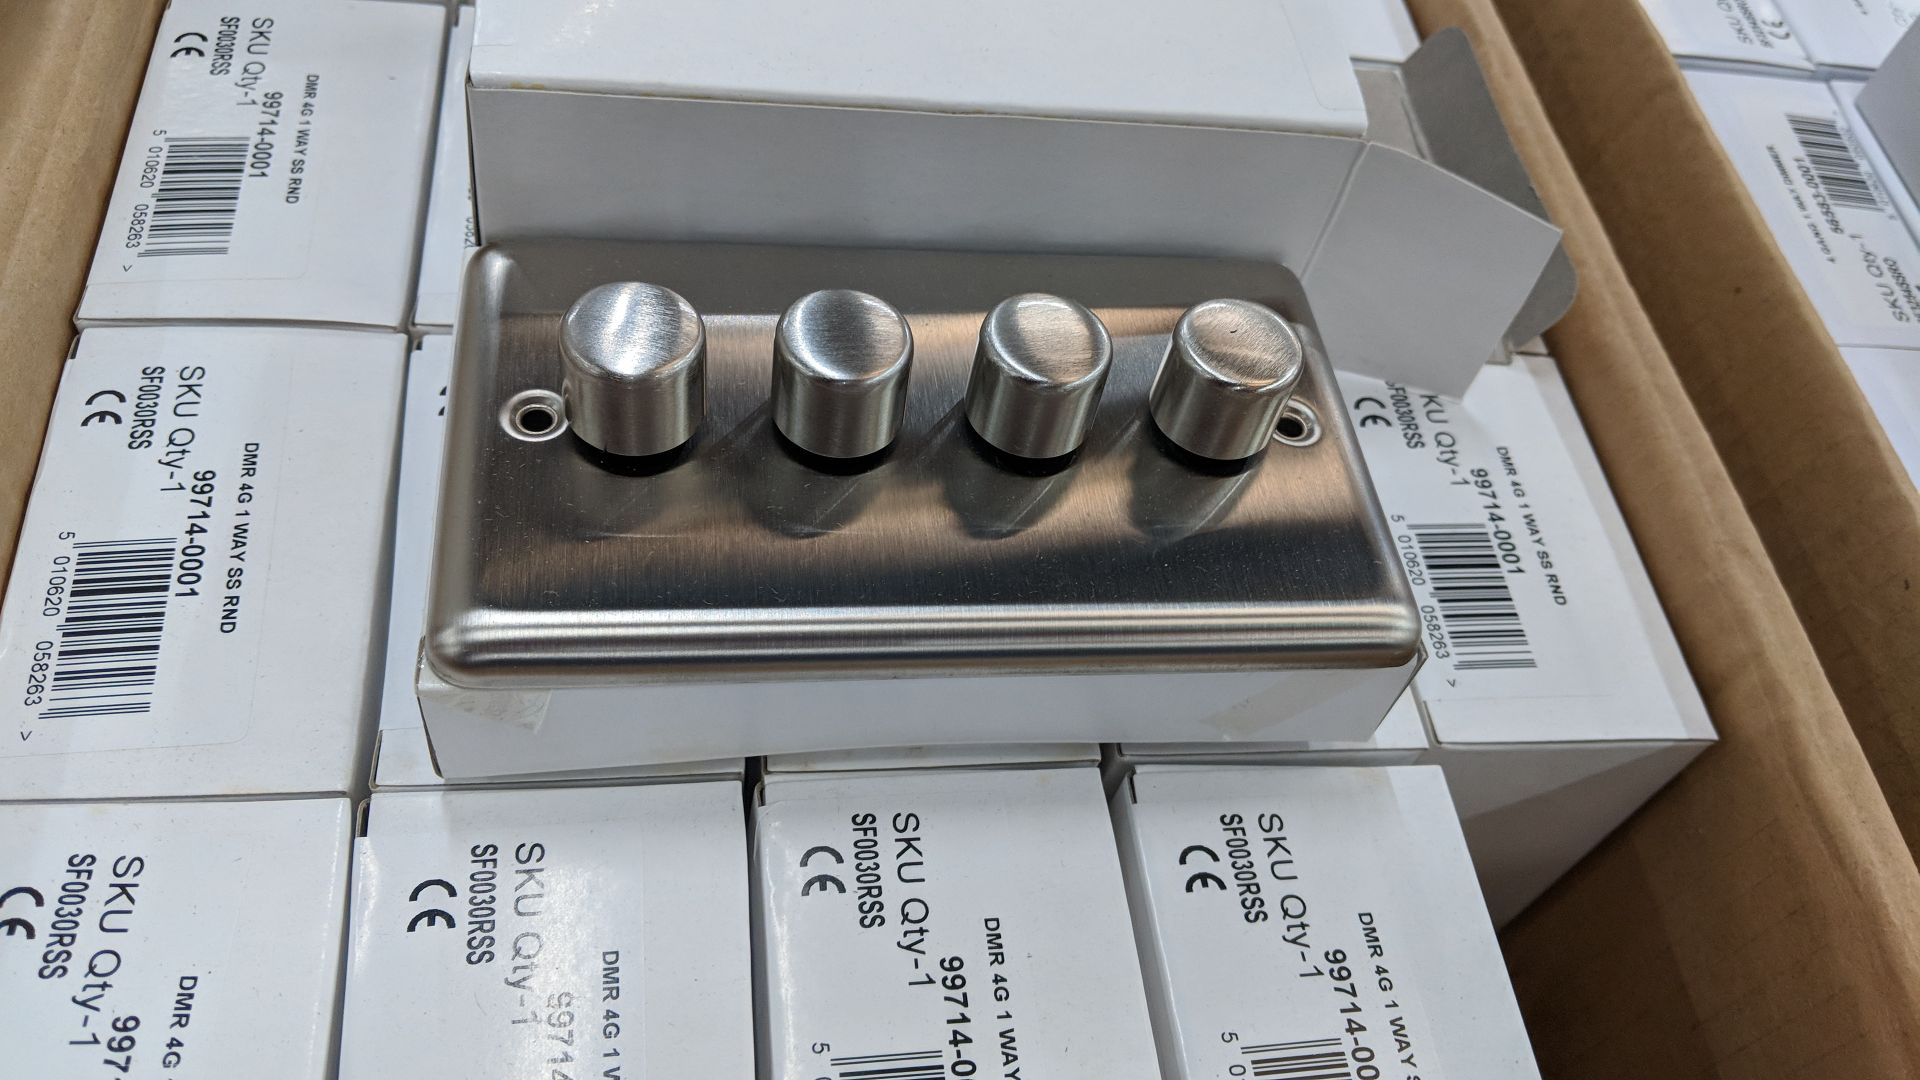 20 off brushed chrome finish 4-way dimmer controls The vast majority of products in this auction - Image 3 of 3